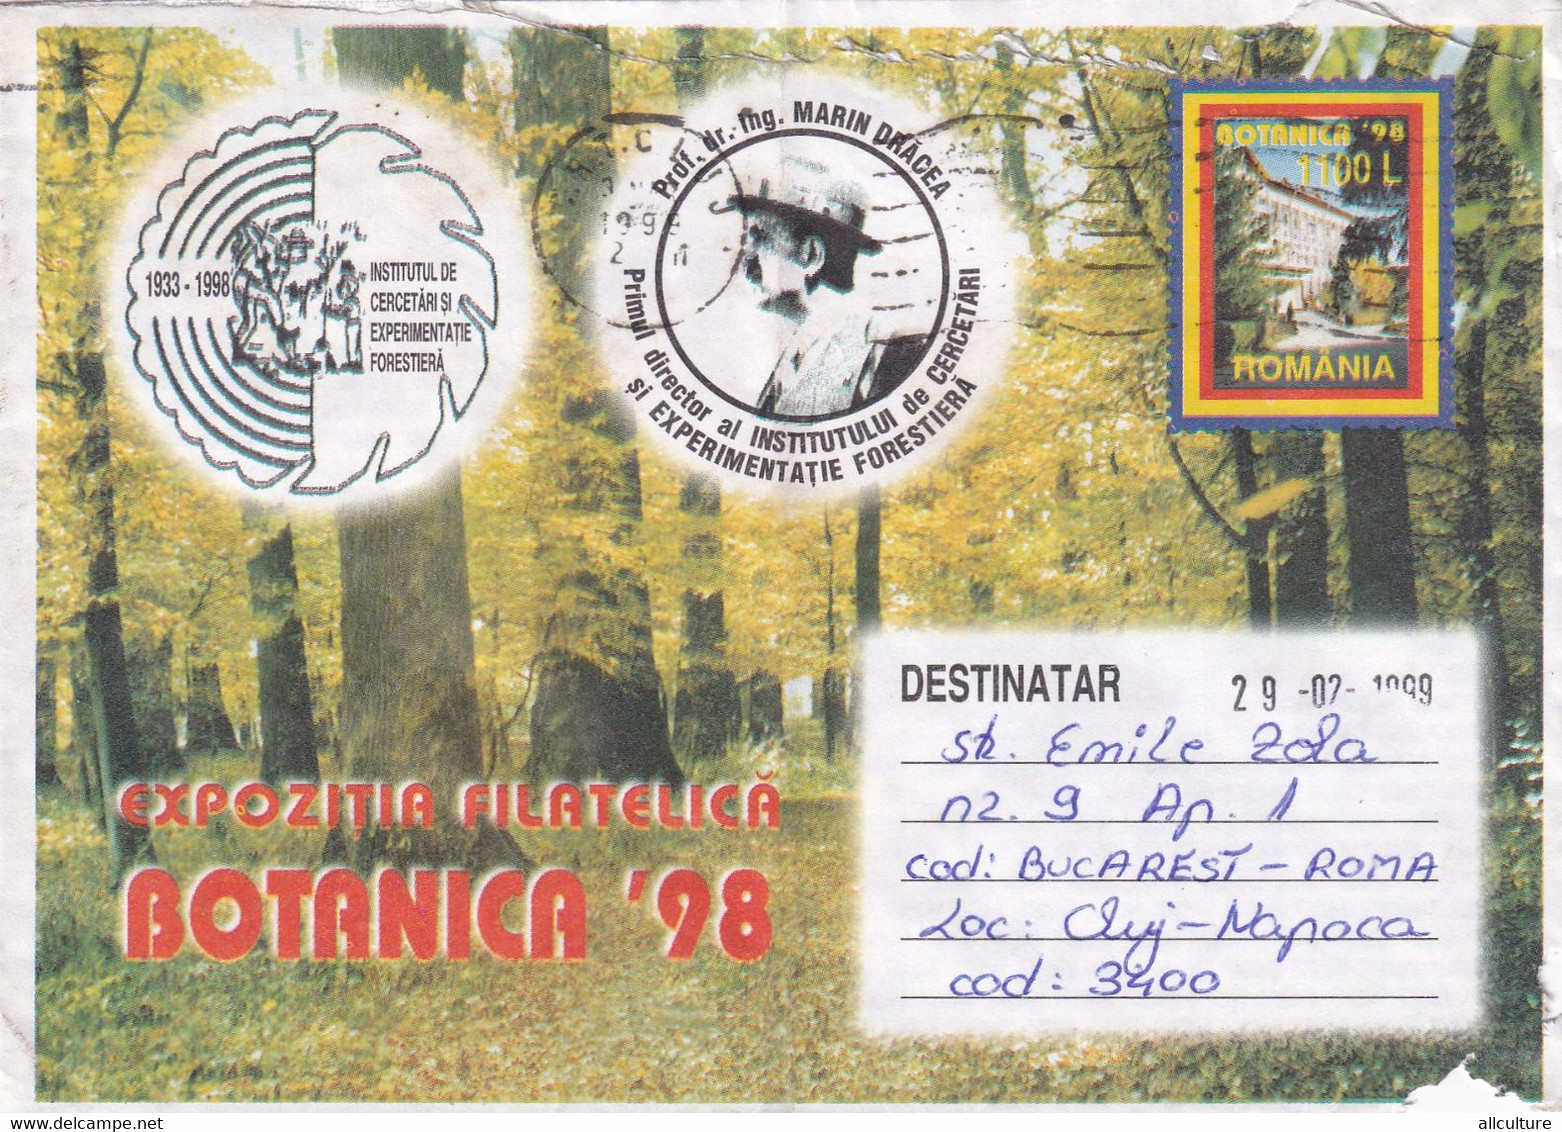 A9636- PHYLATELIC EXHIBITION BOTANICA '98 ROMANIA COVER STATIONERY, FOREST RESEARCH AND EXPERIMENTATION INSTITUTE 1999 - Briefe U. Dokumente